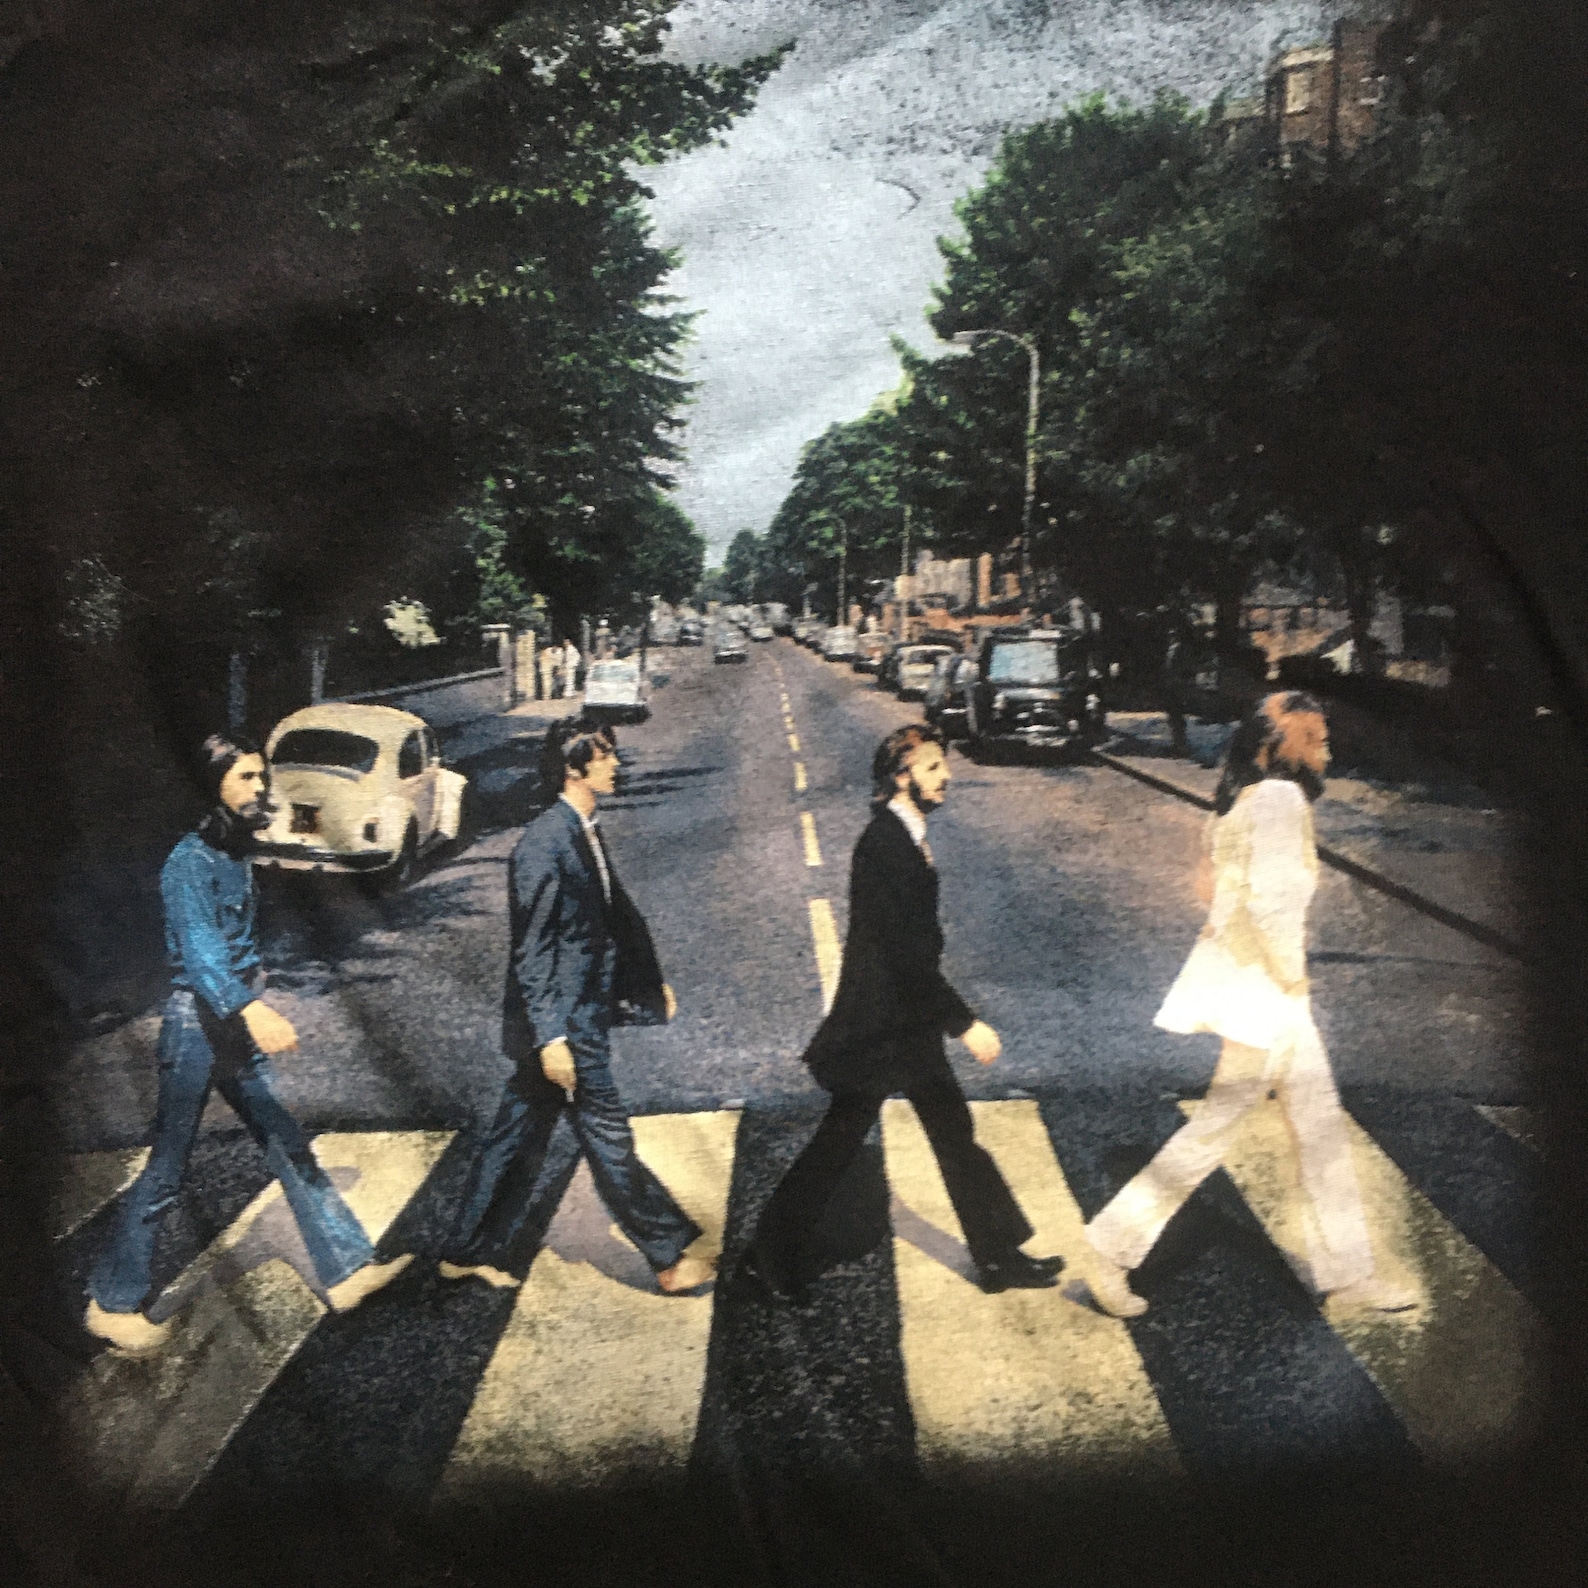 The Beatles Abbey Road Album Cover